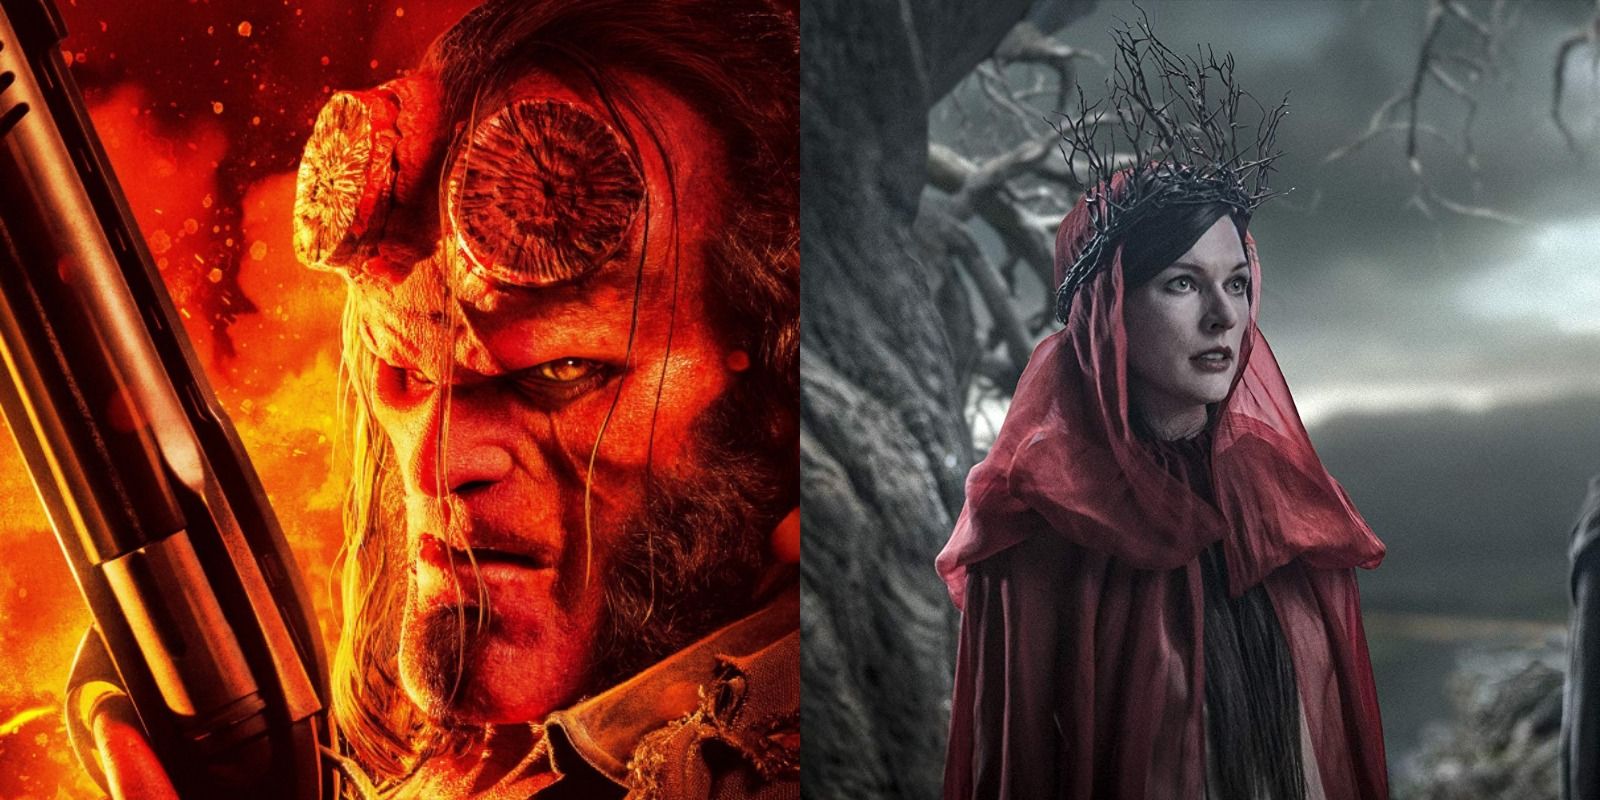 David Harbour and Milla Jovovich in Hellboy 2019